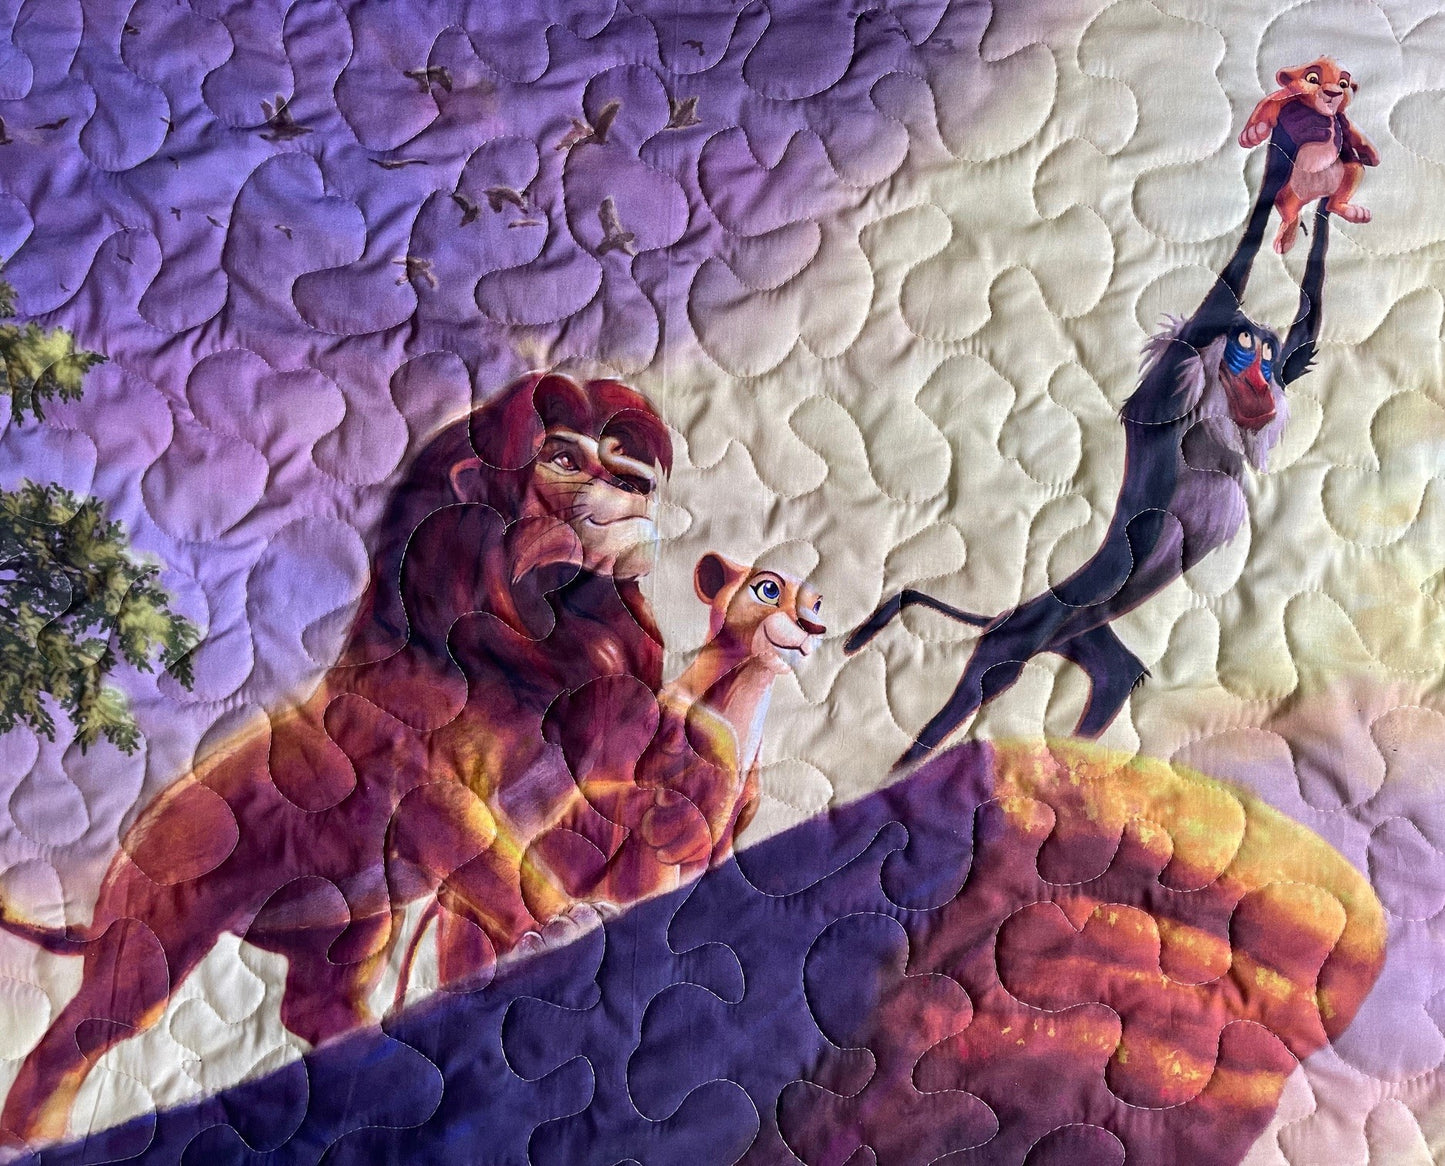 THE LION KING DIGITAL PRINT INSPIRED QUILTED BLANKET 36"x44" 1 Available